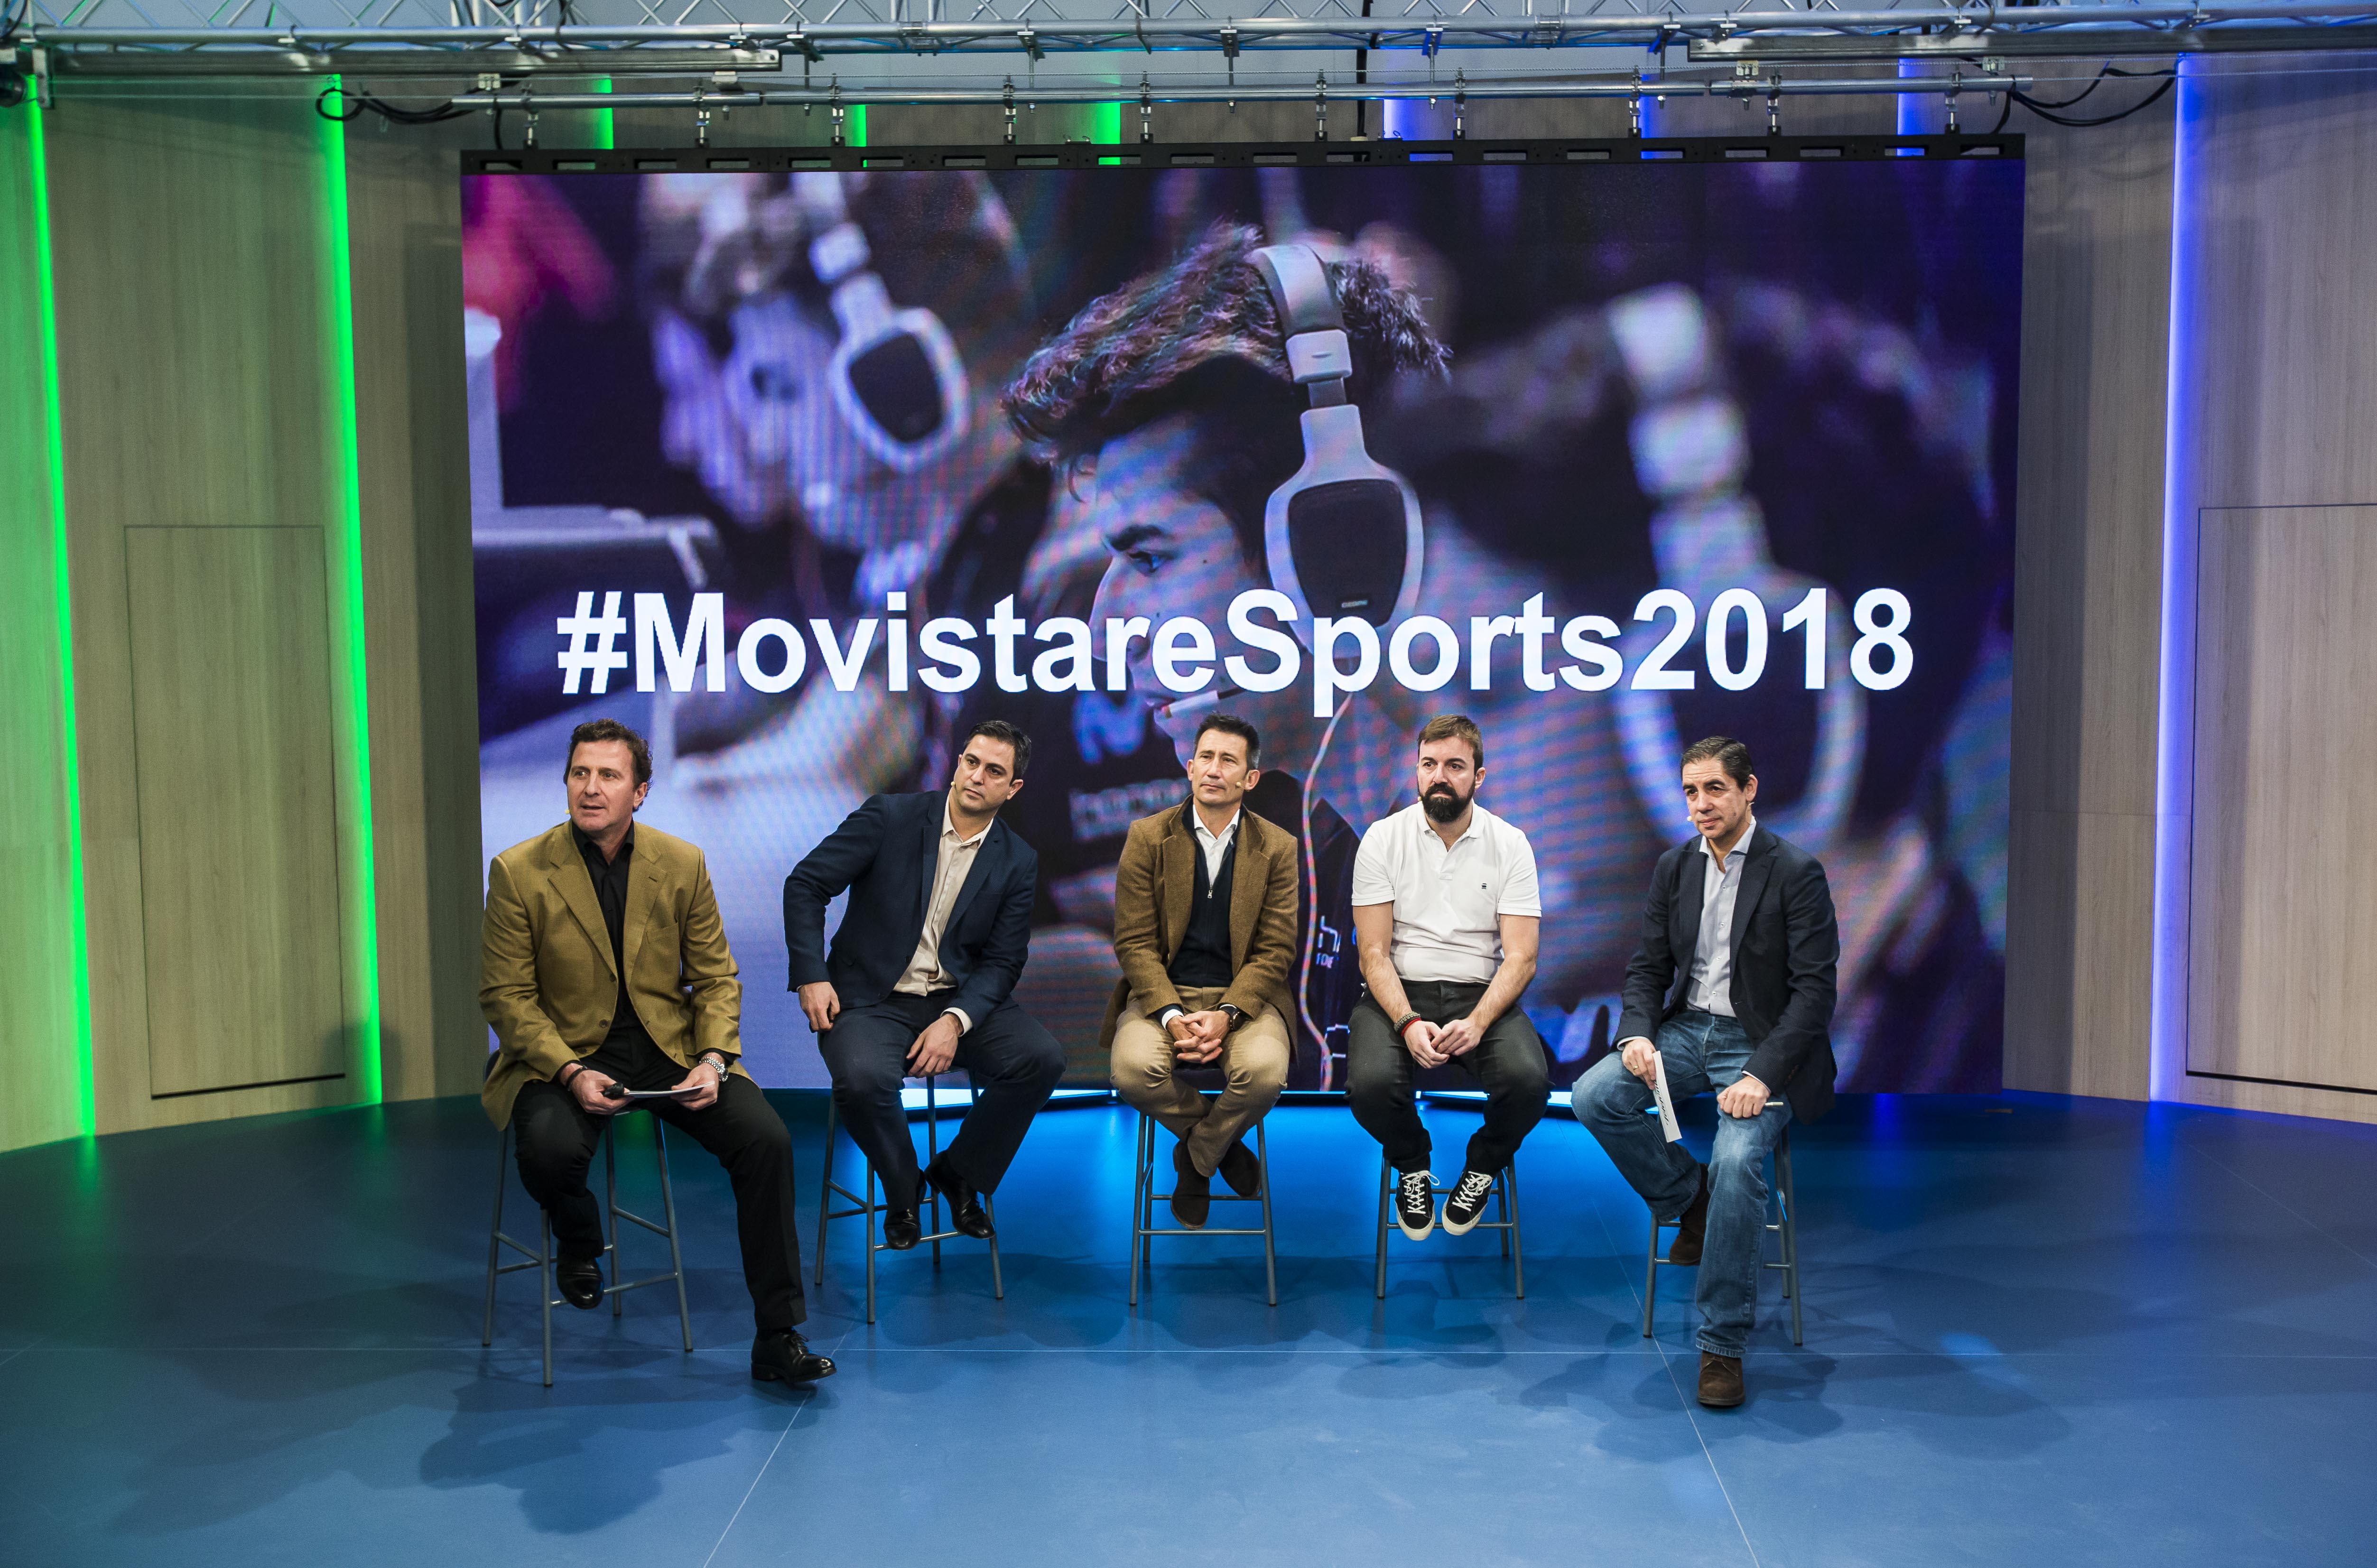 From left to right: Dante Cacciatore, Director of Communications, Brand, and Customer Experience at Telefónica España; Manuel Moreno, Managing Director Spain & Latam at ESL; Carlos Martínez, Director of Sports Contents at Movistar+; Fernando Piquer, CEO of Movistar Riders; and Juan Emilio Maíllo